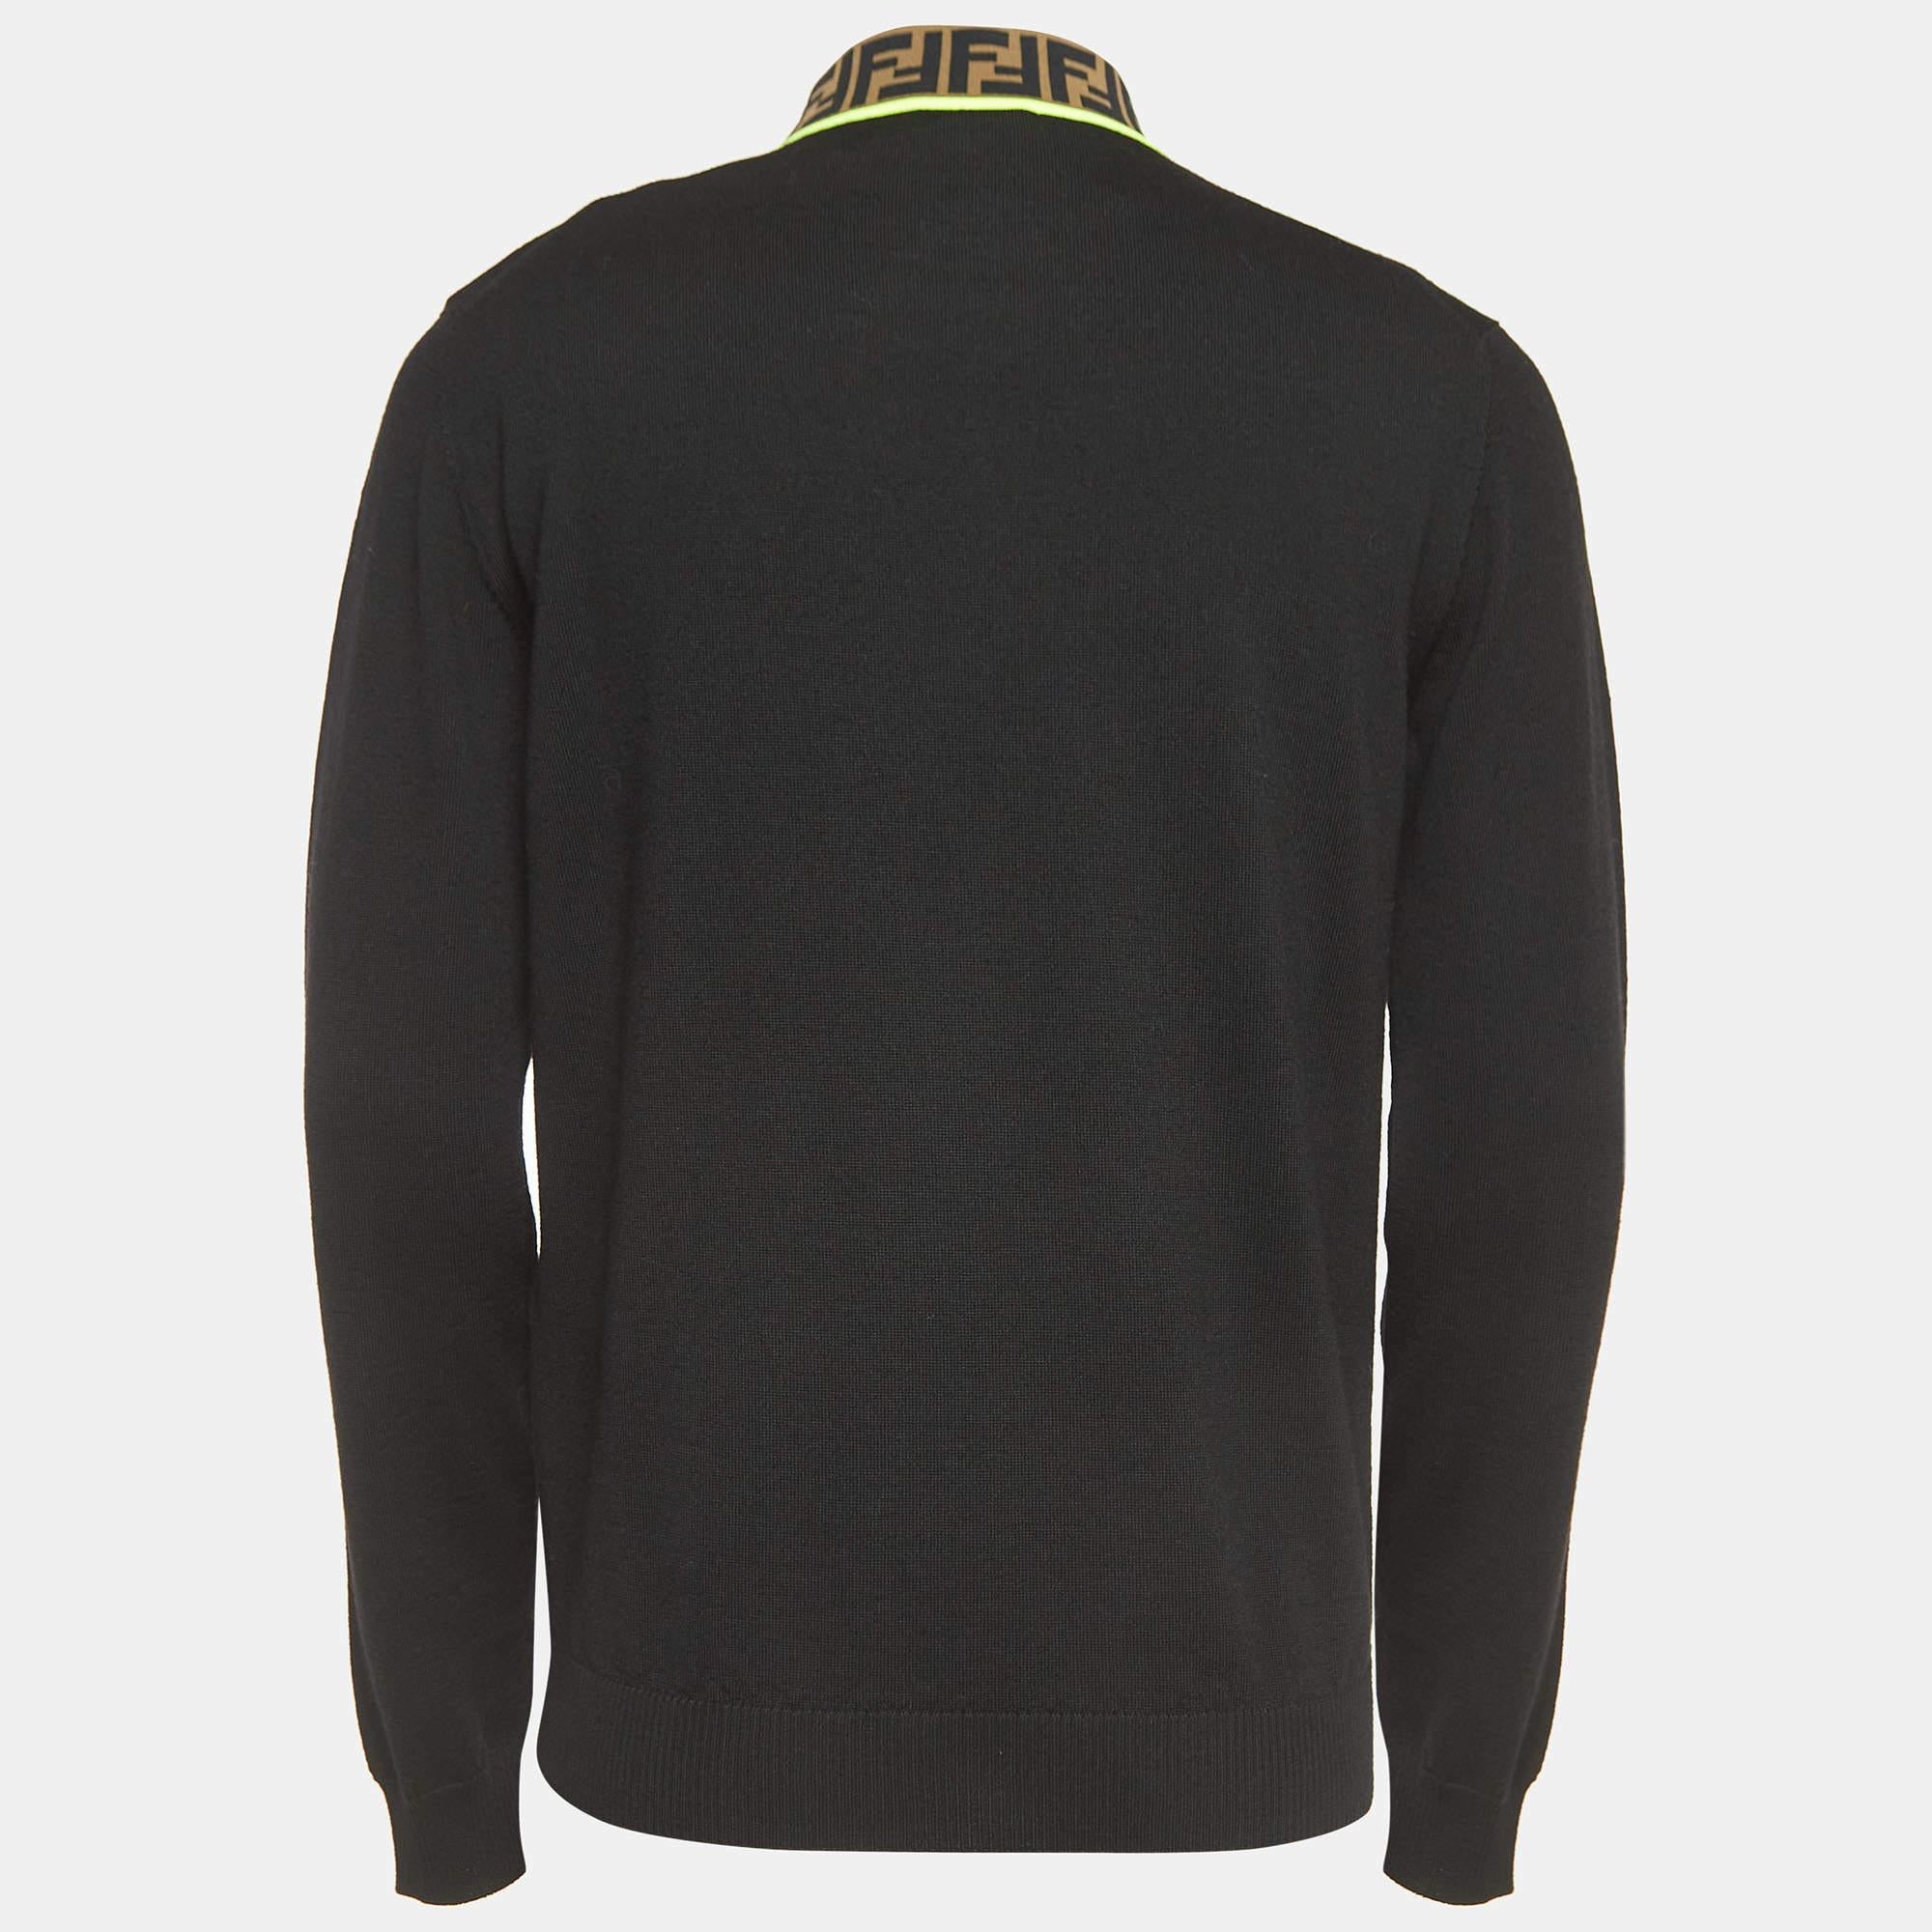 The Prada sweater is a luxurious and versatile wardrobe staple. Crafted from high-quality wool, it features a logo pattern on the turtleneck. This timeless piece seamlessly blends comfort with elevated style, making it a must-have for any